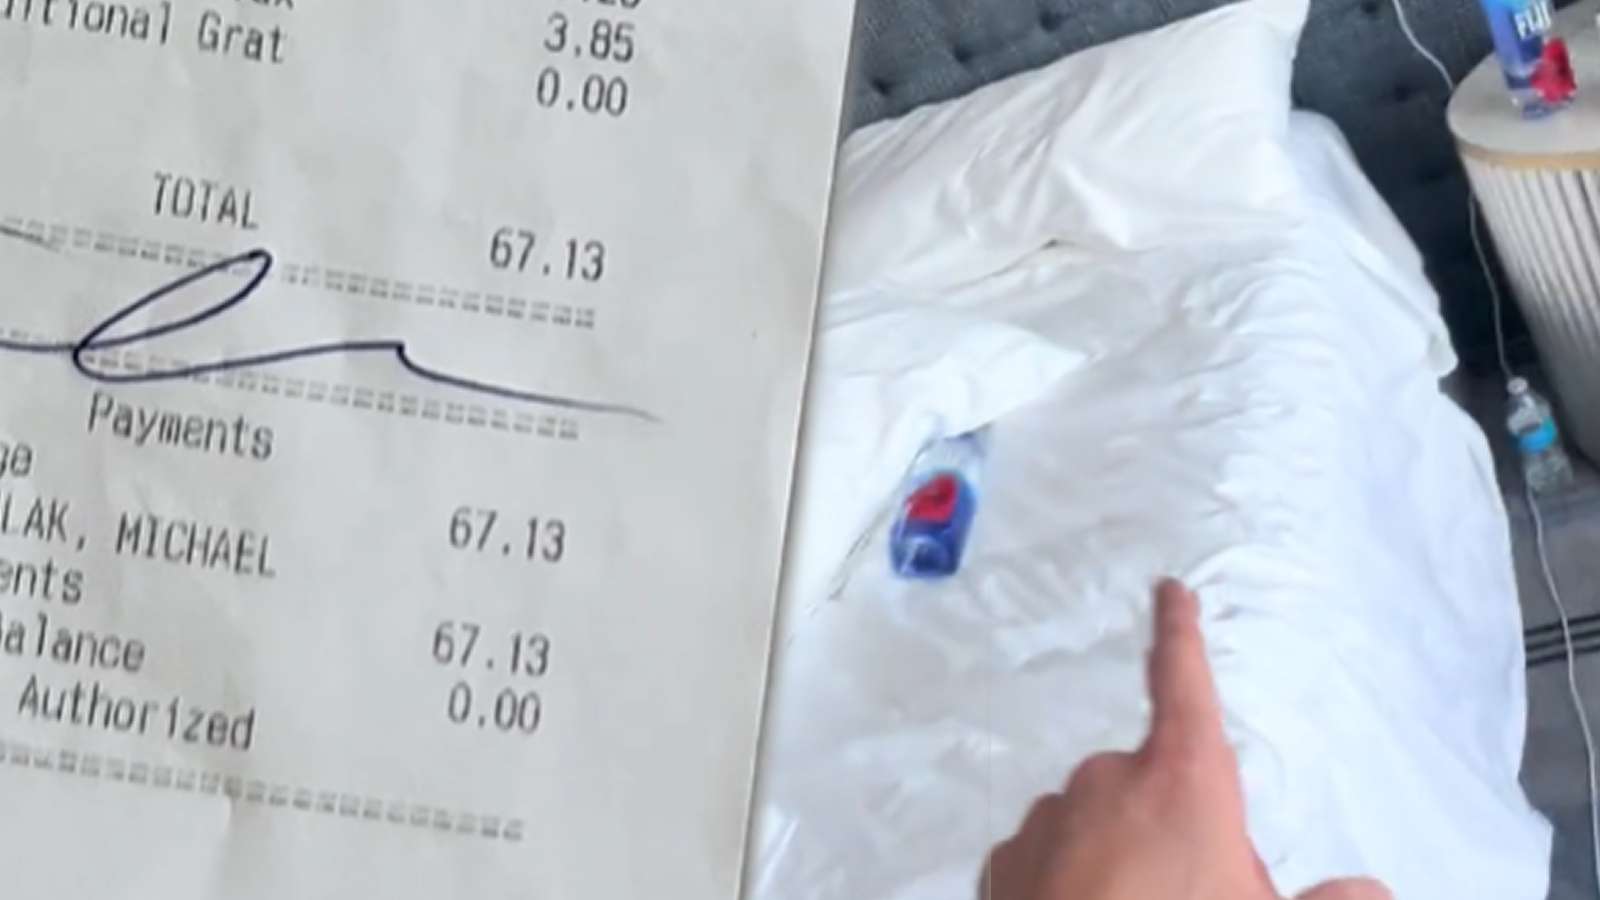 Viewers baffled as hotel charges man $67 for two waters and a coffee